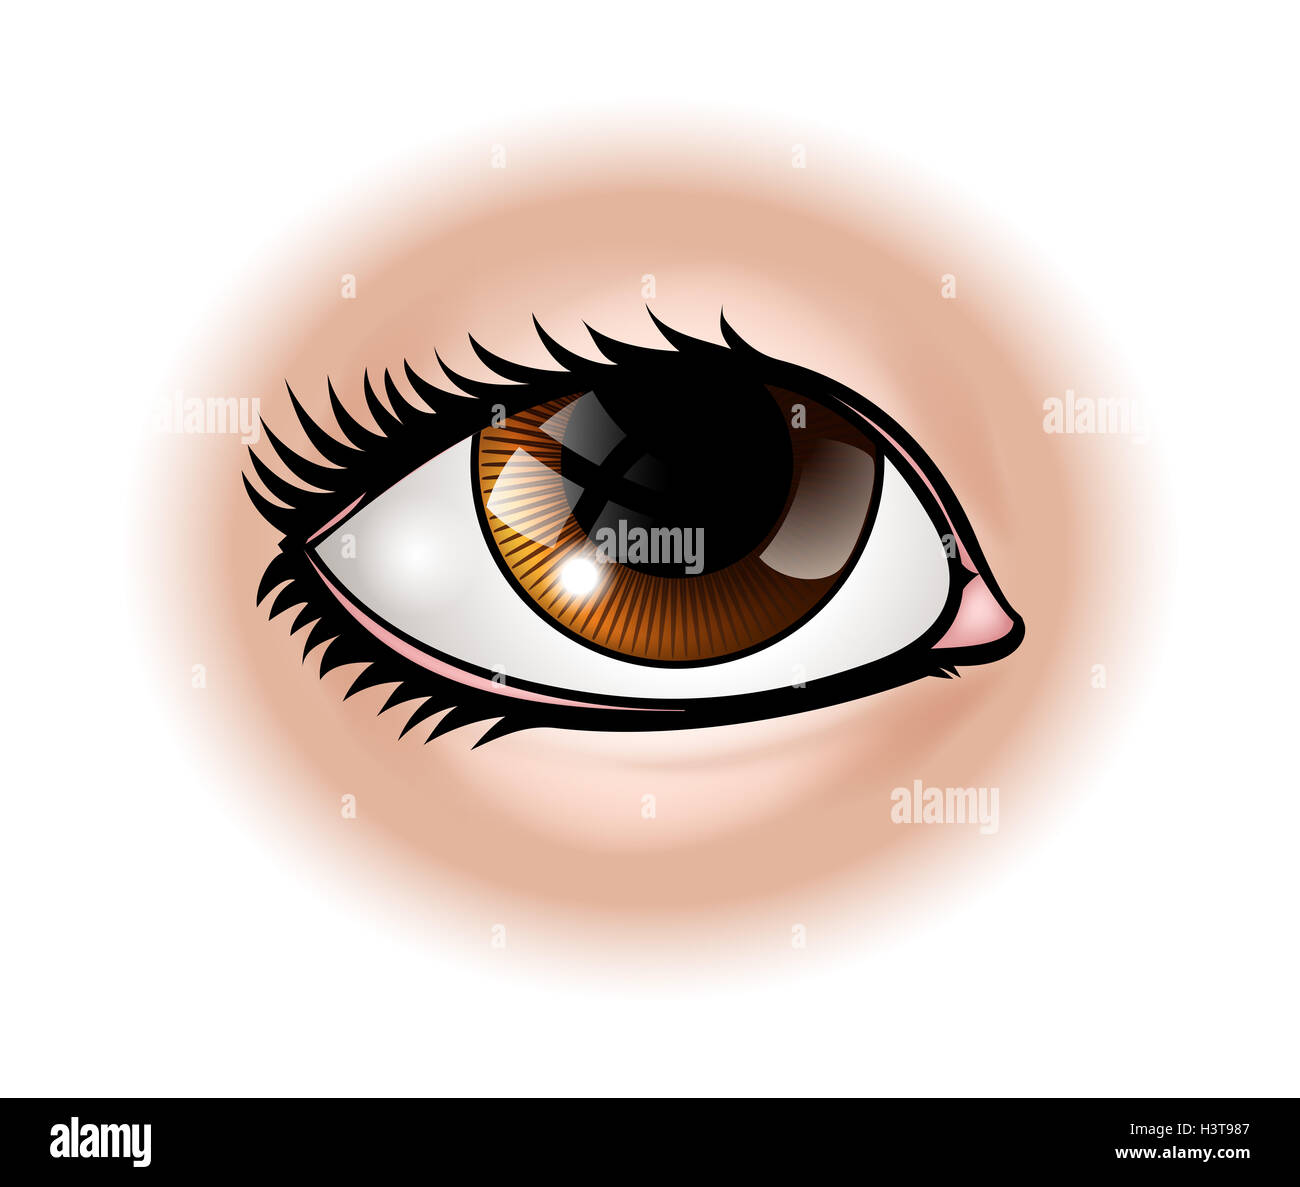 Closeup of human eye Cut Out Stock Images & Pictures - Alamy